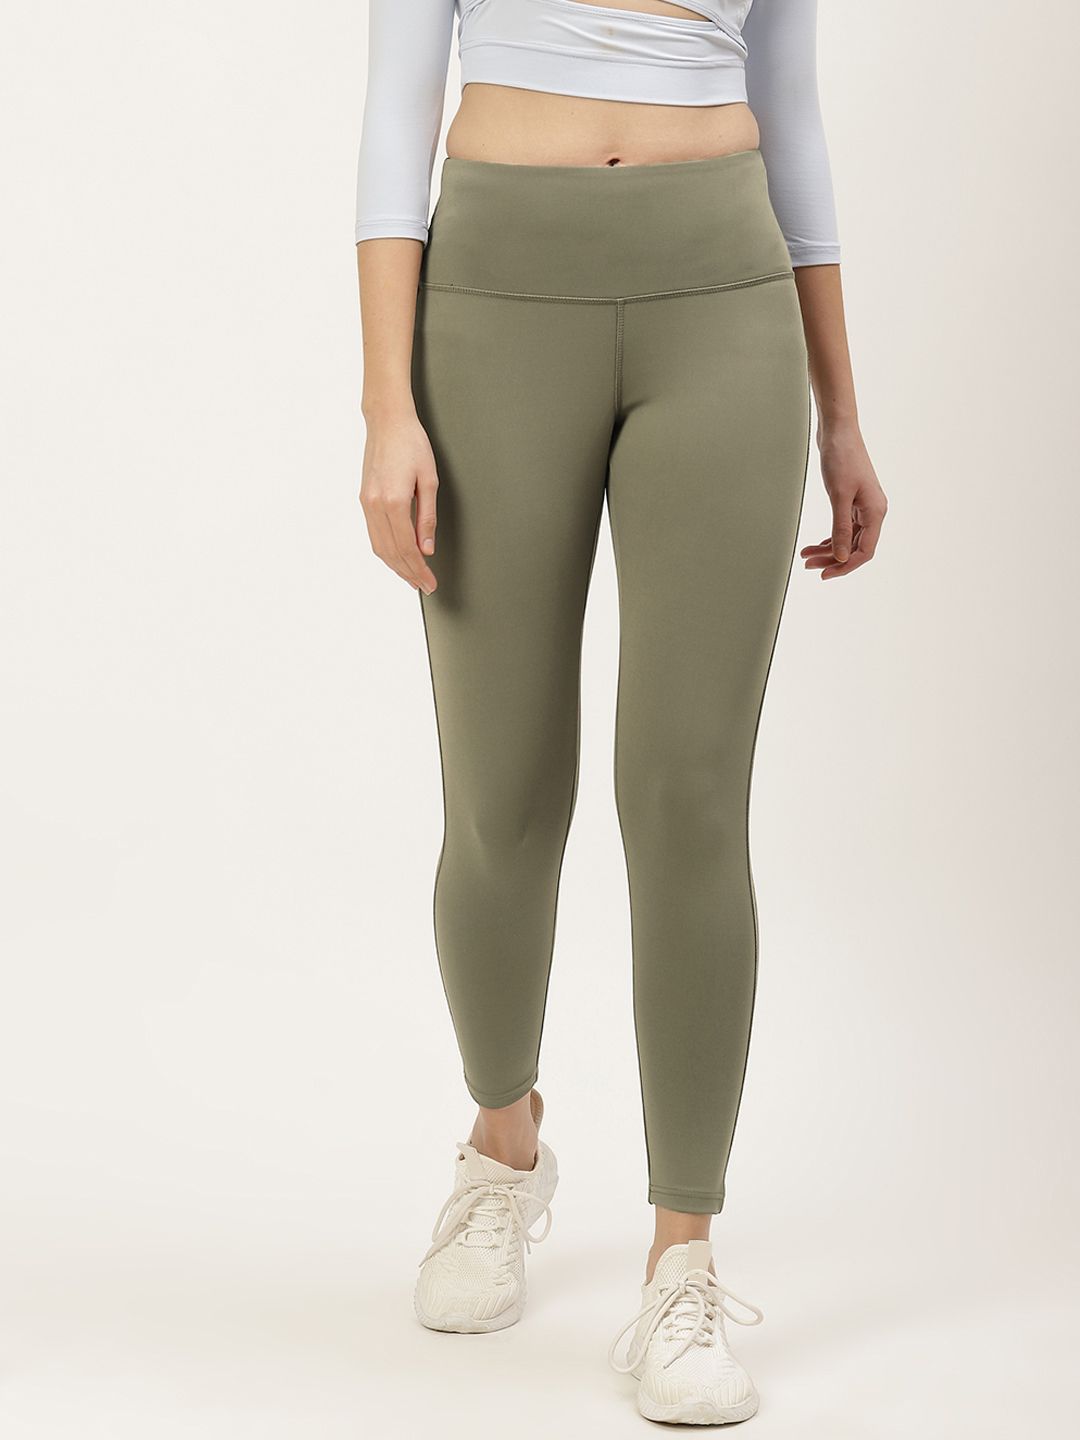 KICA Women Olive Green High Waisted Tights In Signature Buttery Soft Fabric Price in India